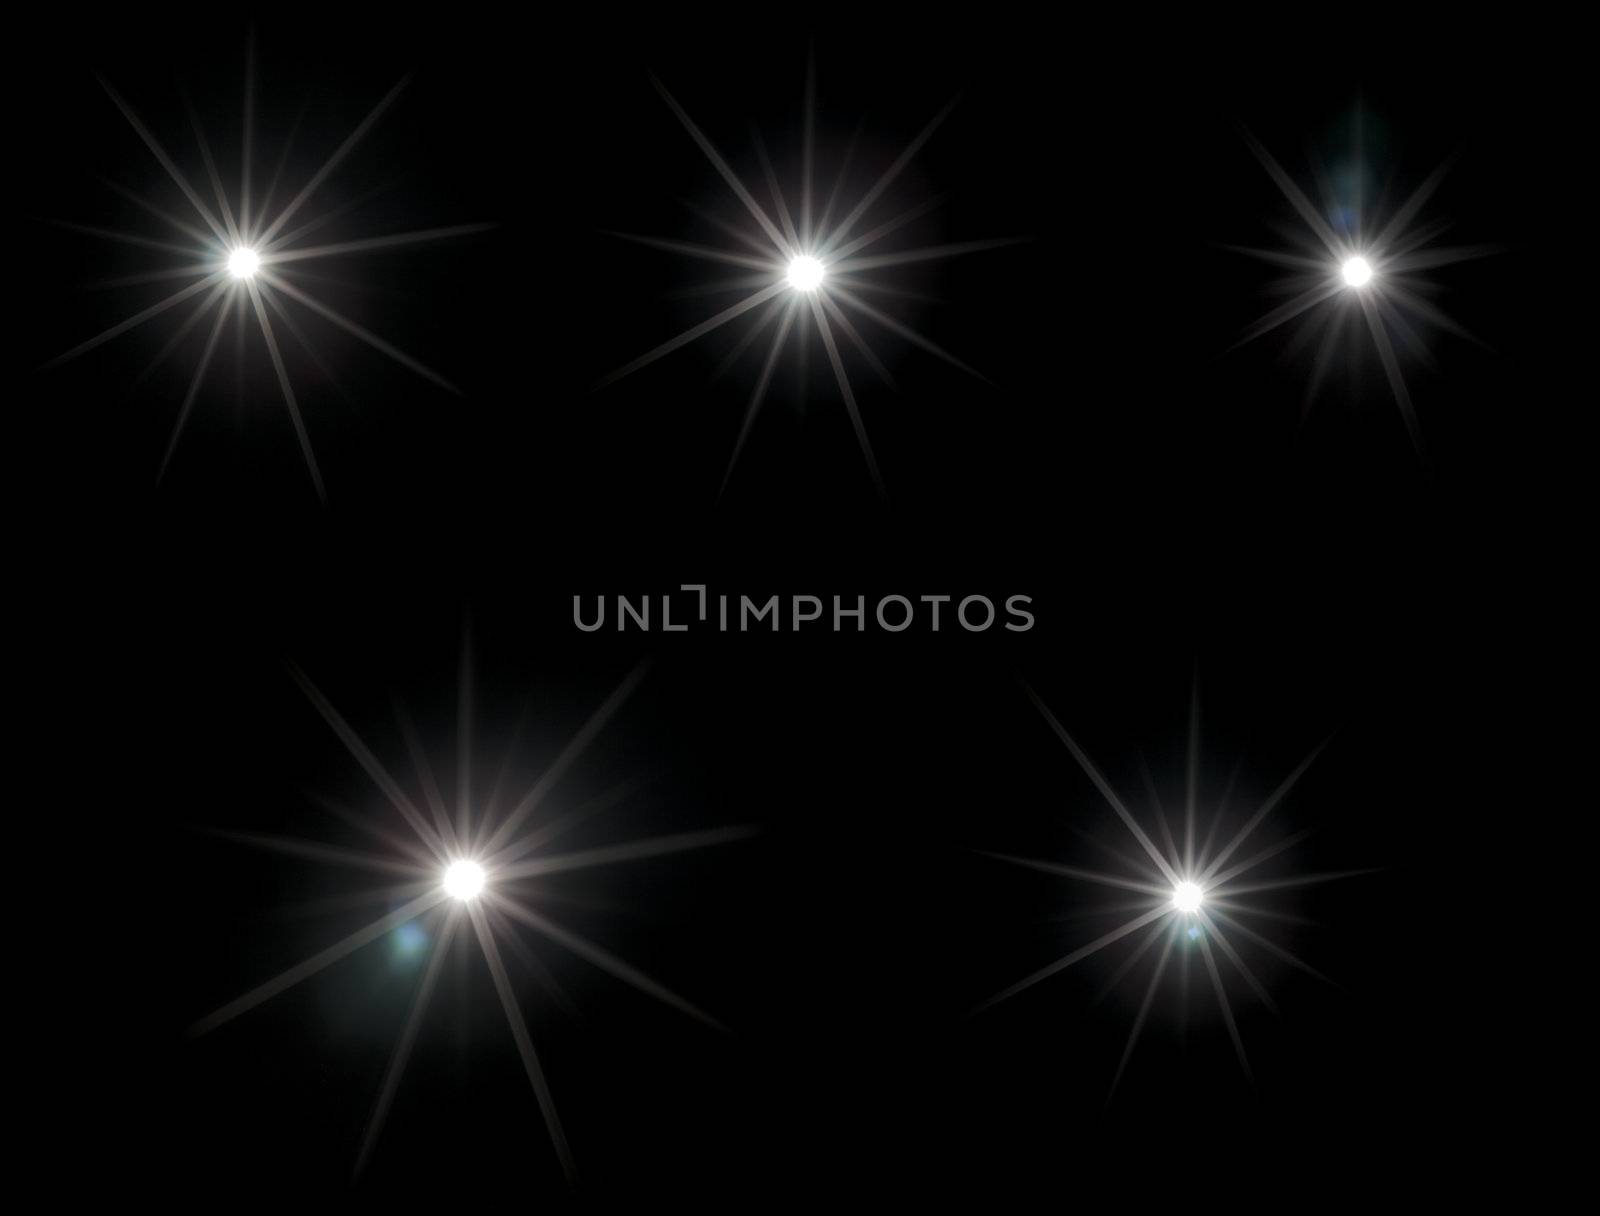 A Set of five real lens flares on black background. Round light source and small aperture.